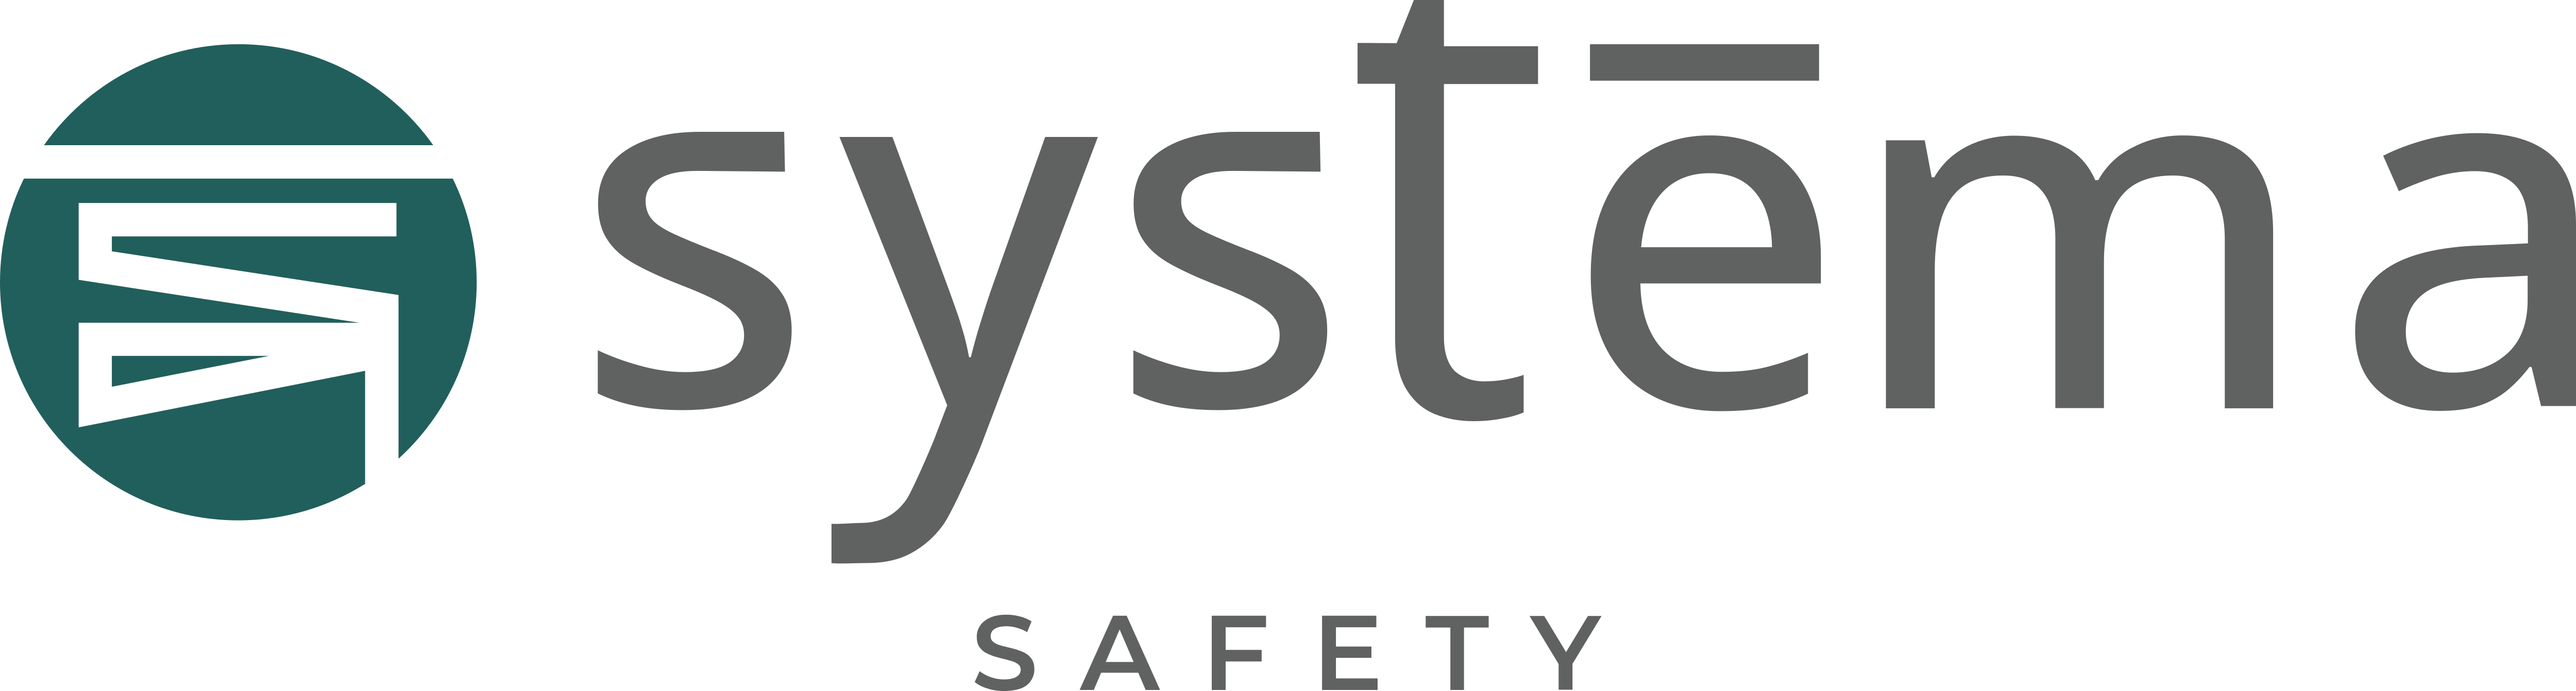 Systema Safety